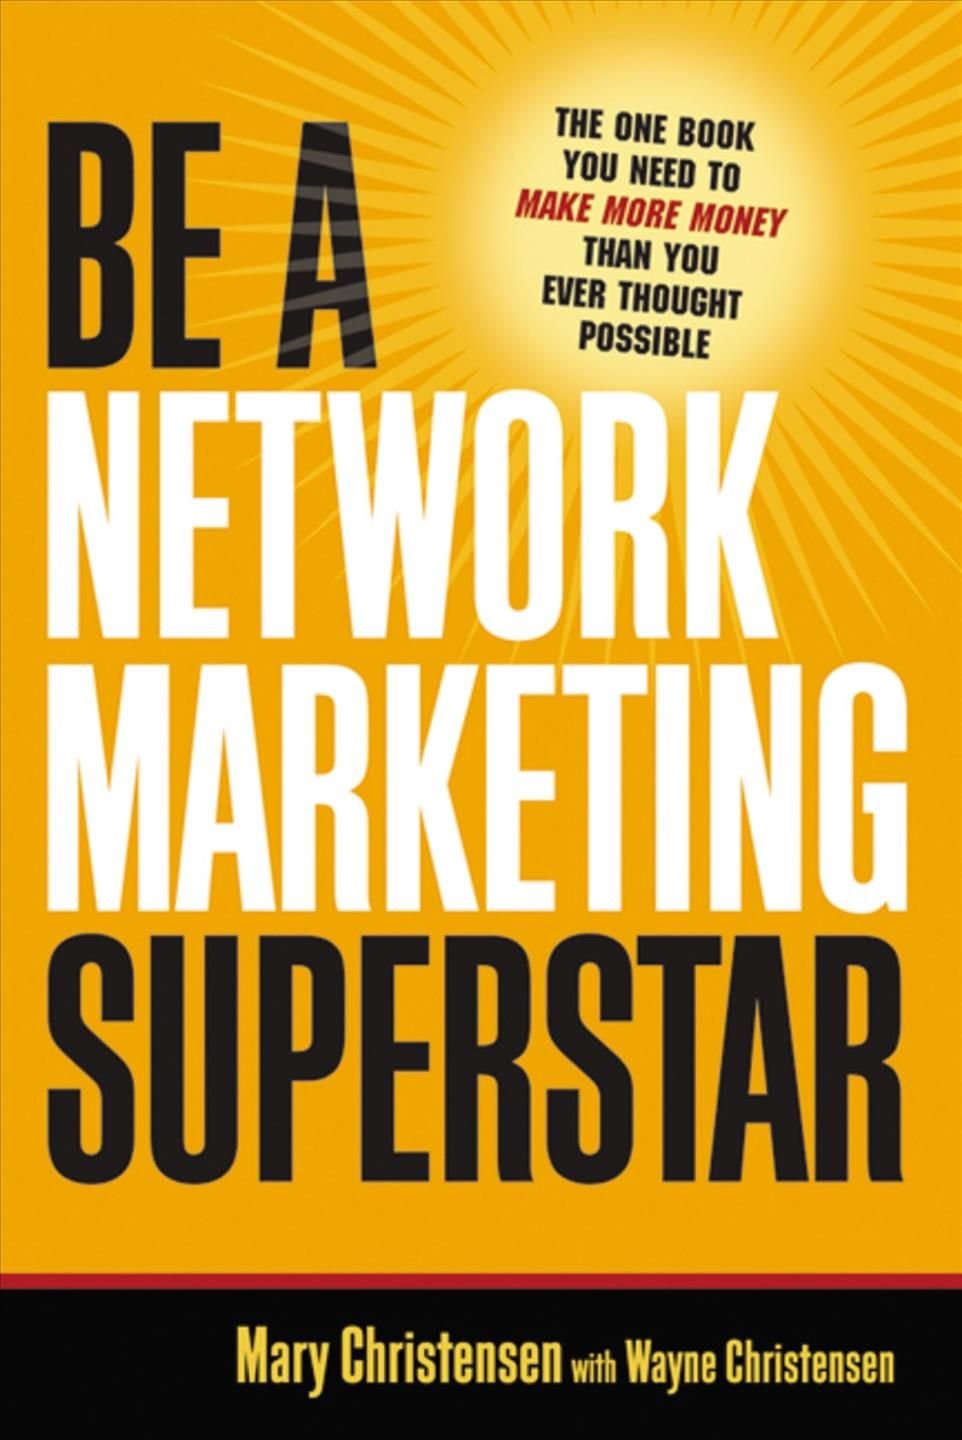 Be A Network Marketing Superstar. The One Book You Need to Make More Money Than You Ever Thought Possible